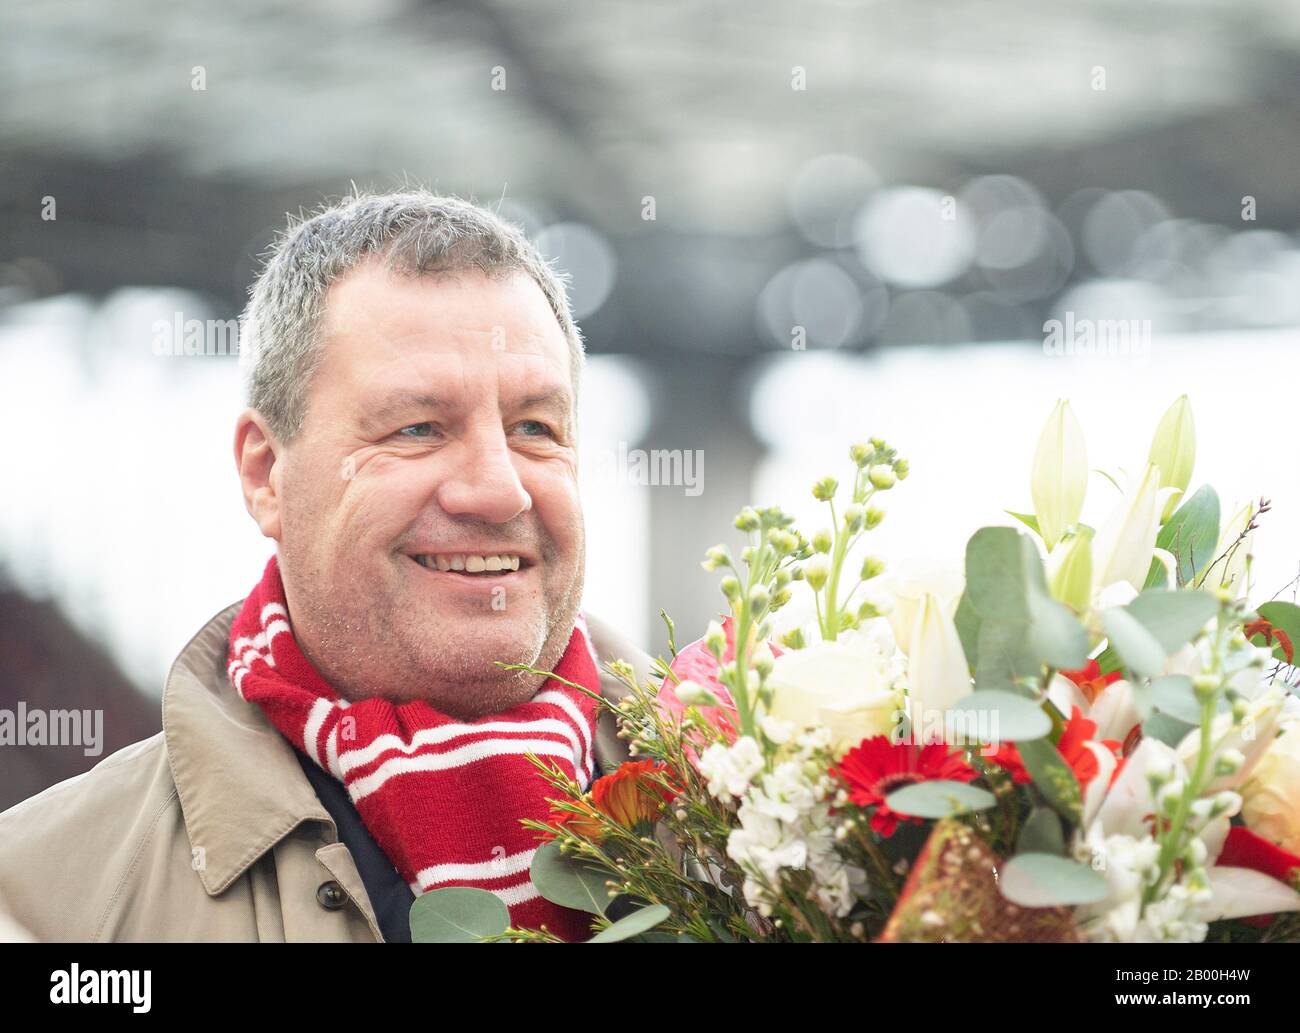 Werner Wolf President K With Flowers Soccer 1 Bundesliga 22 Matchday Fc Cologne K Fc Bayern Munich M 1 4 On February 16 2020 In Koeln Germany Usage Worldwide Stock Photo Alamy